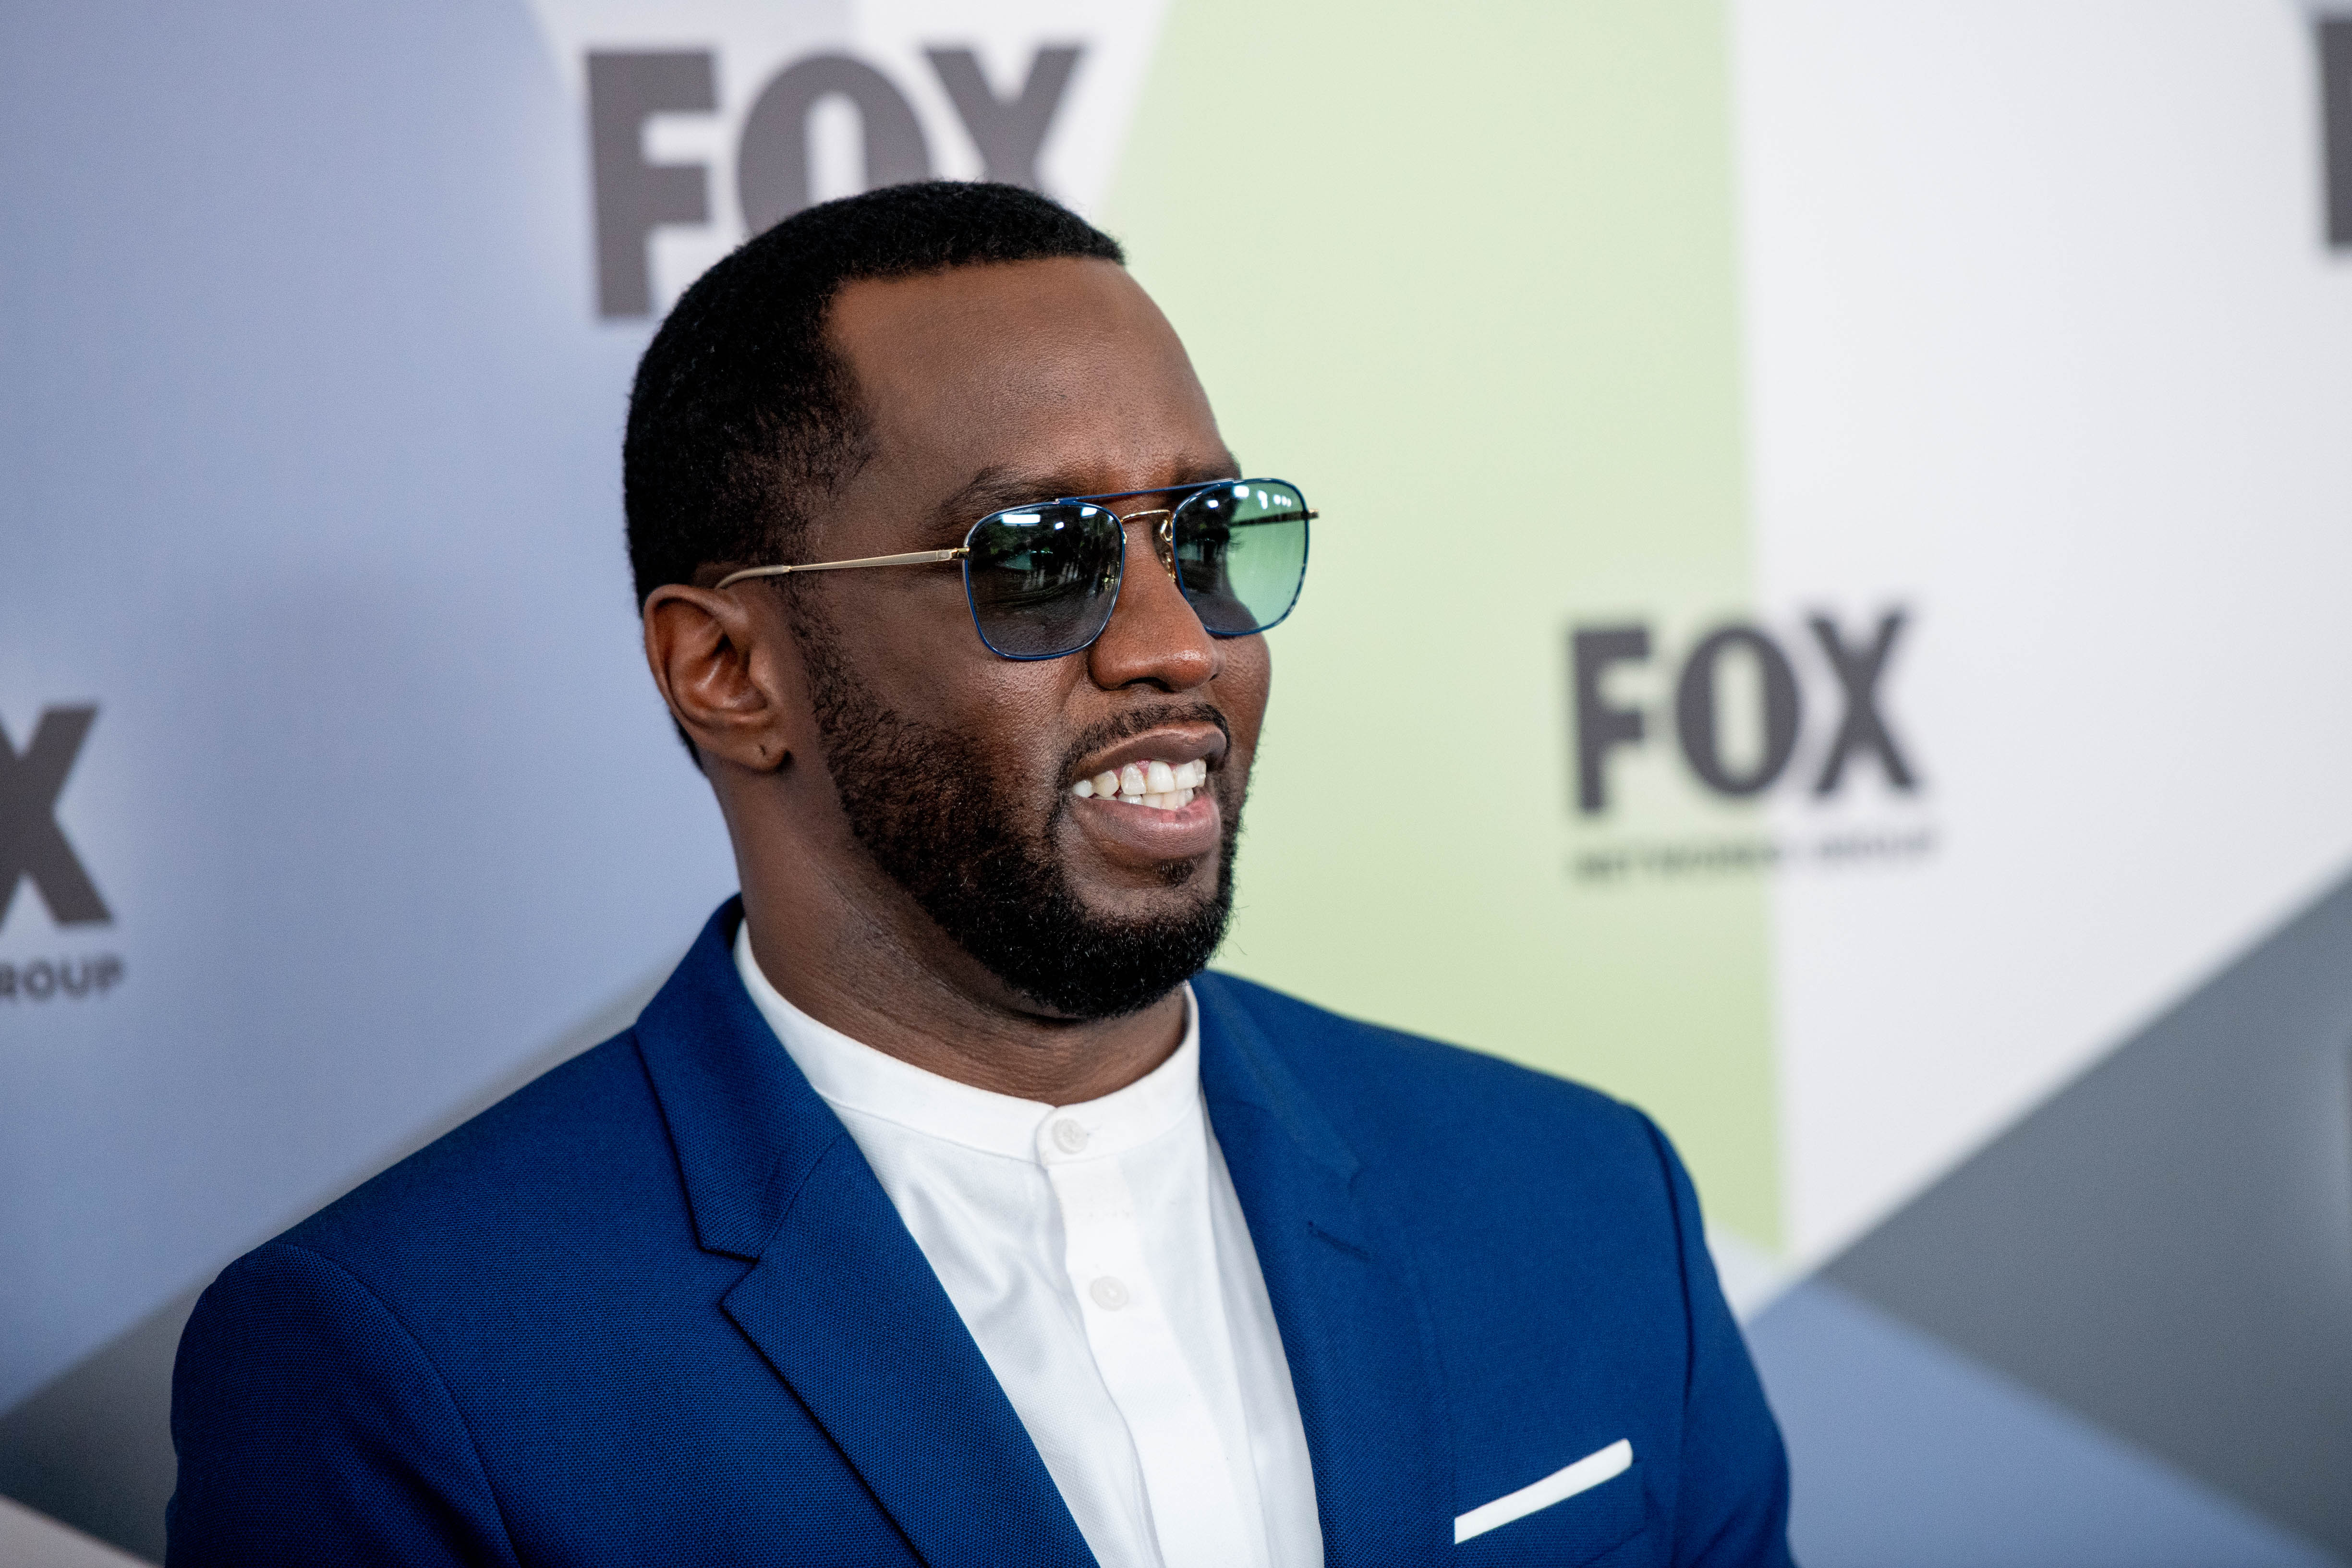 P. Diddy at the 2018 Fox Network Upfront in New York. | Photo: Getty Images